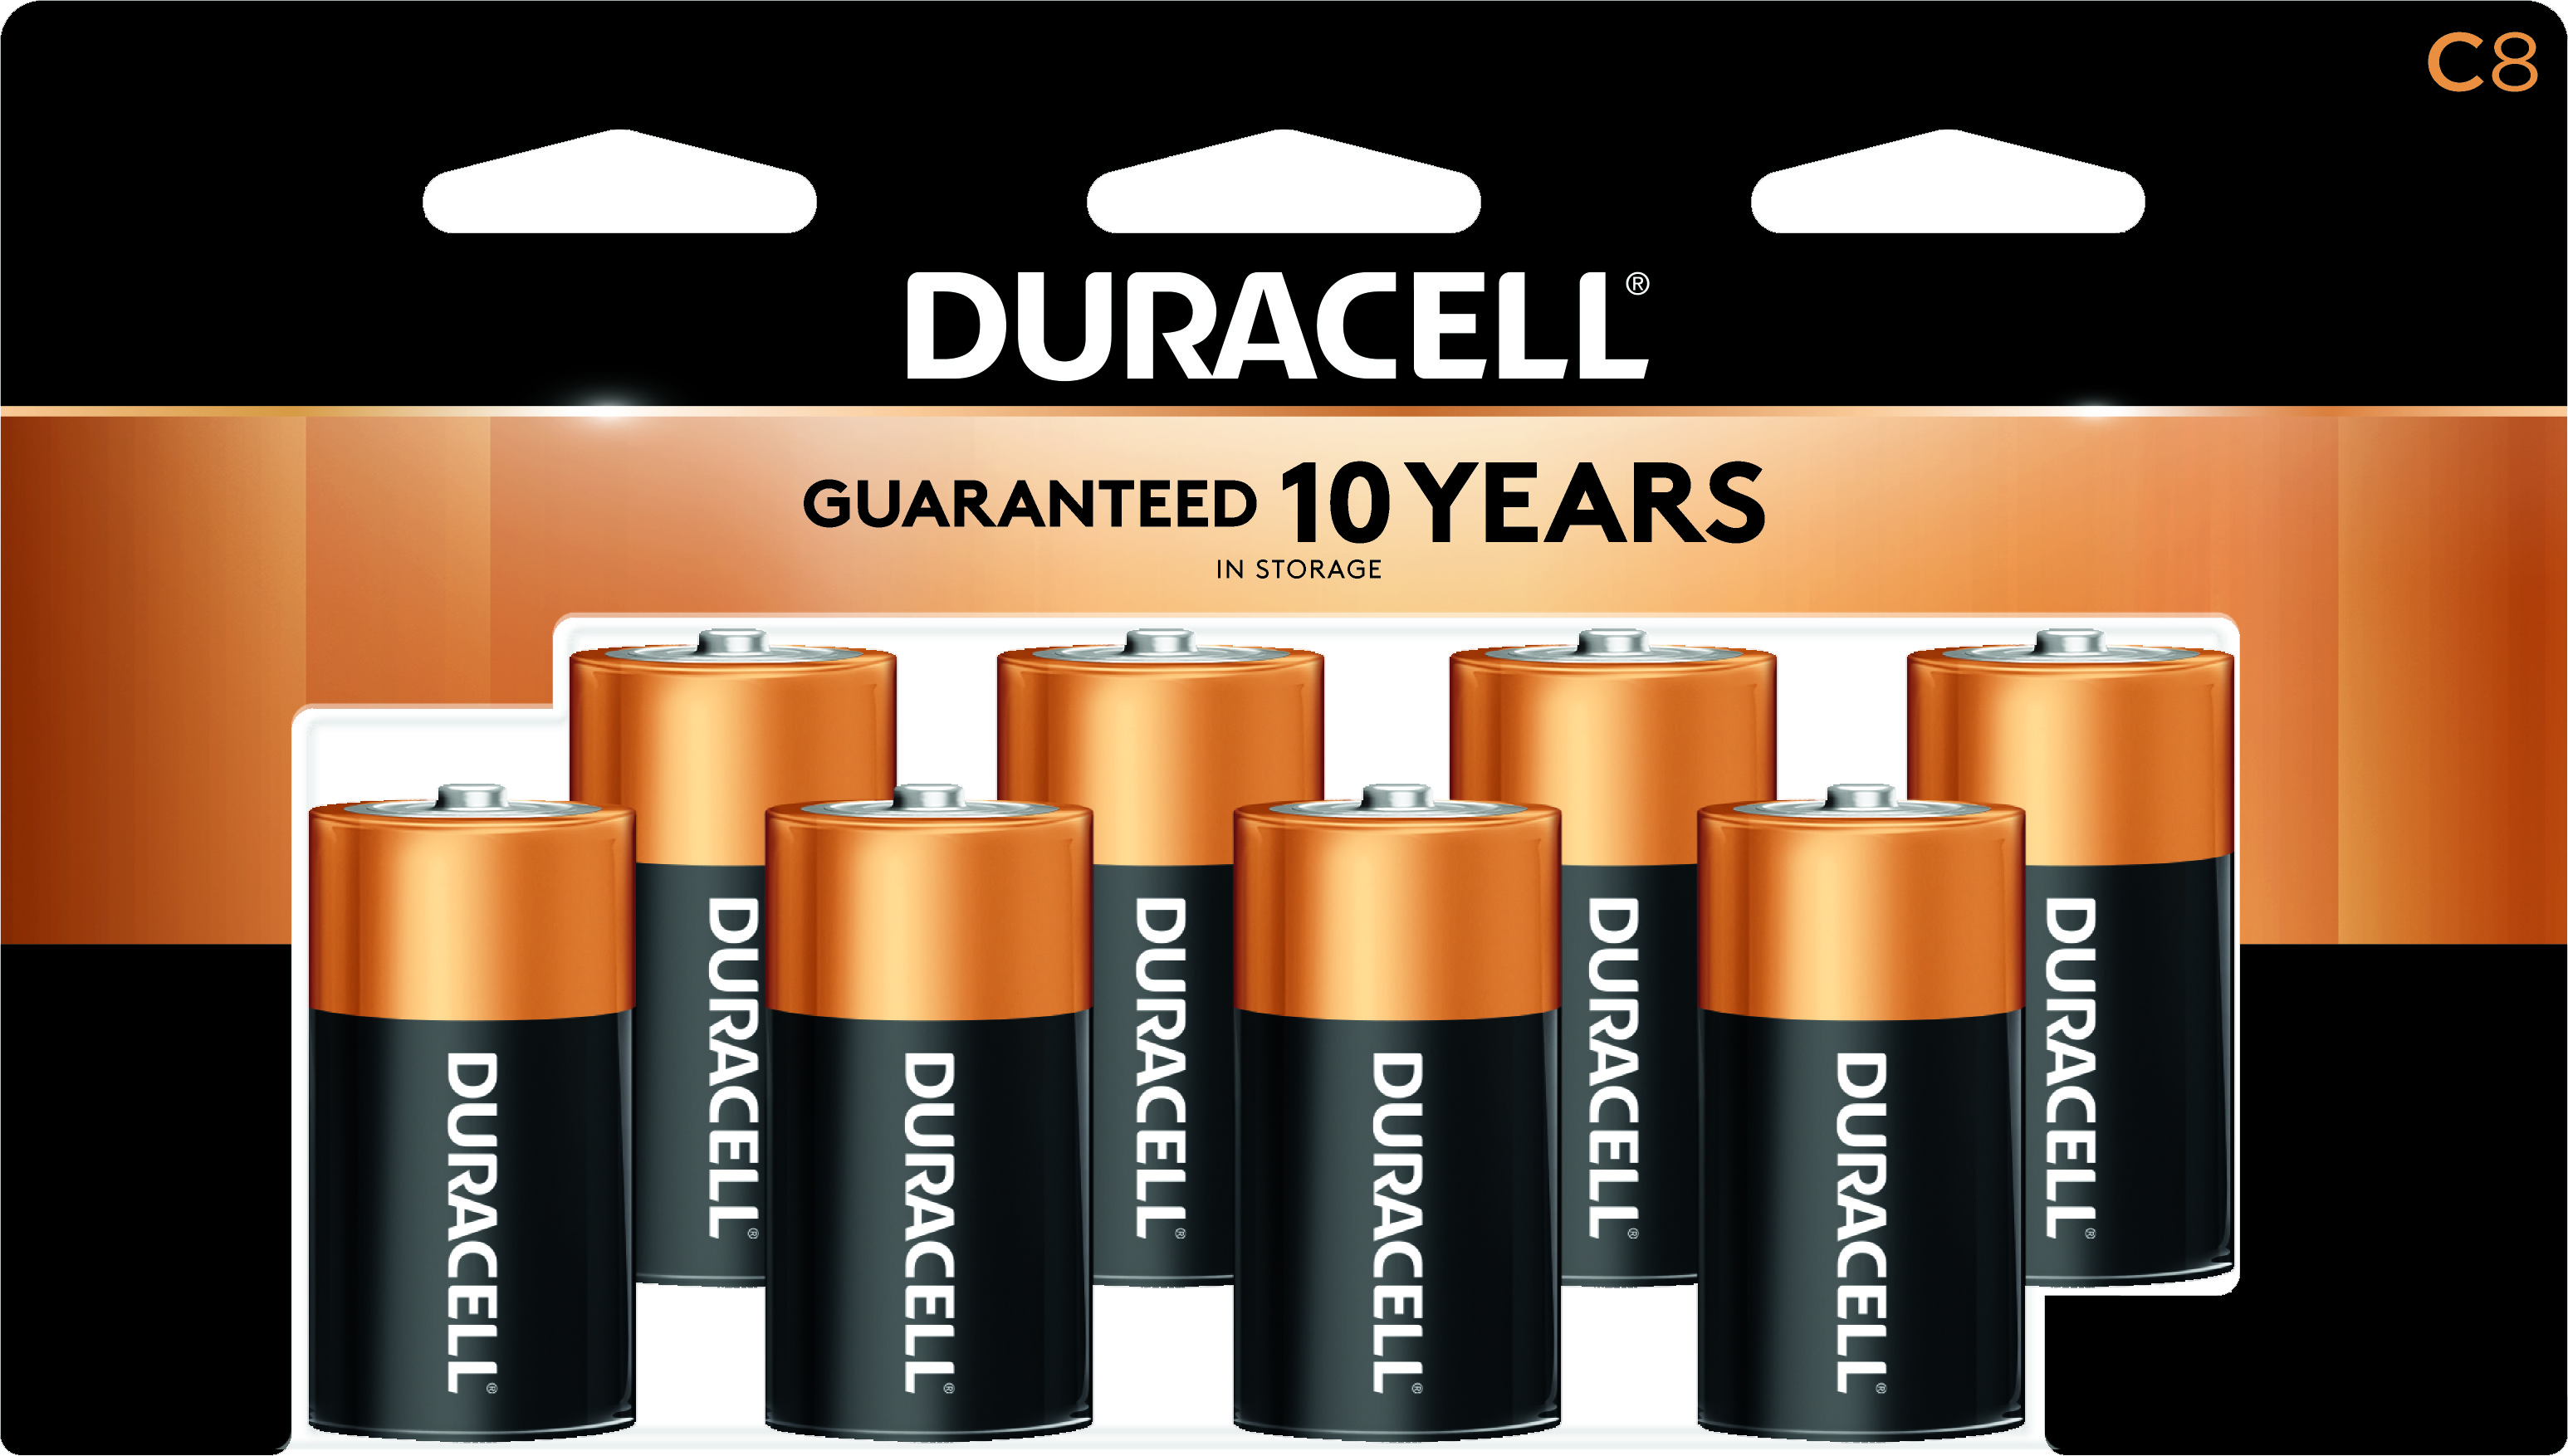 Duracell Coppertop C Battery, Long Lasting C Batteries, 8 Pack - image 1 of 7